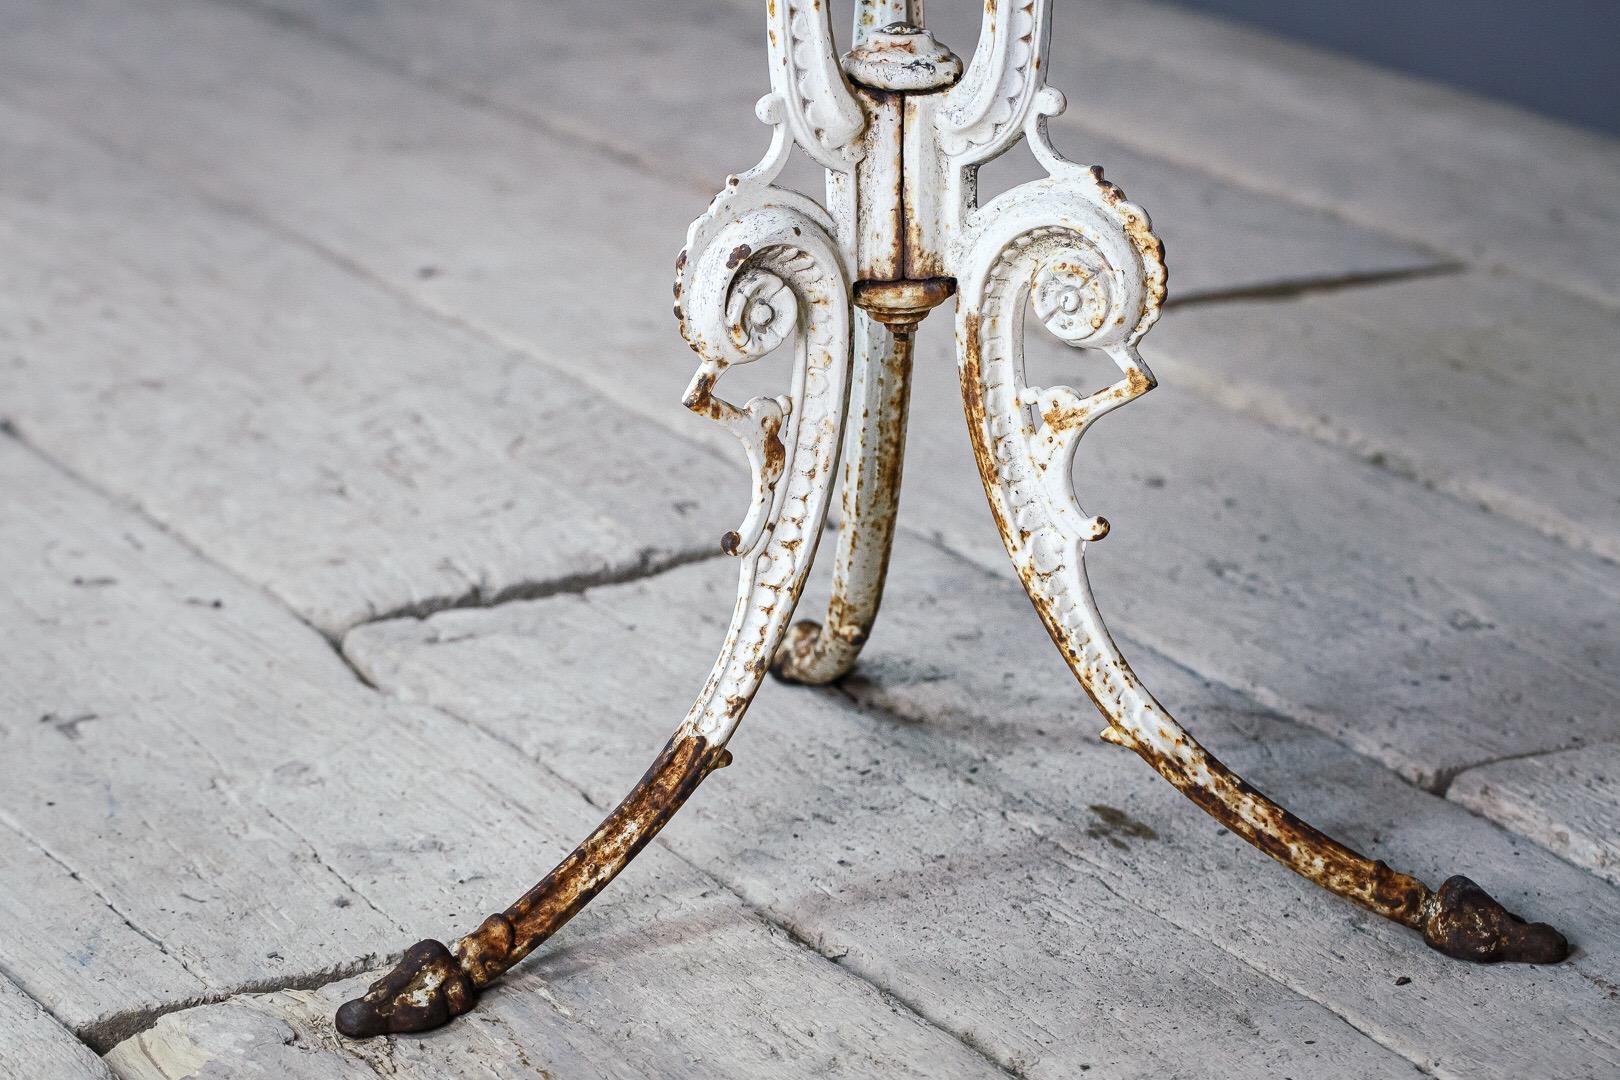 Iron and marble bistro table. Decorative delicate cast iron base, wonderfully shaped and weathered marble top.